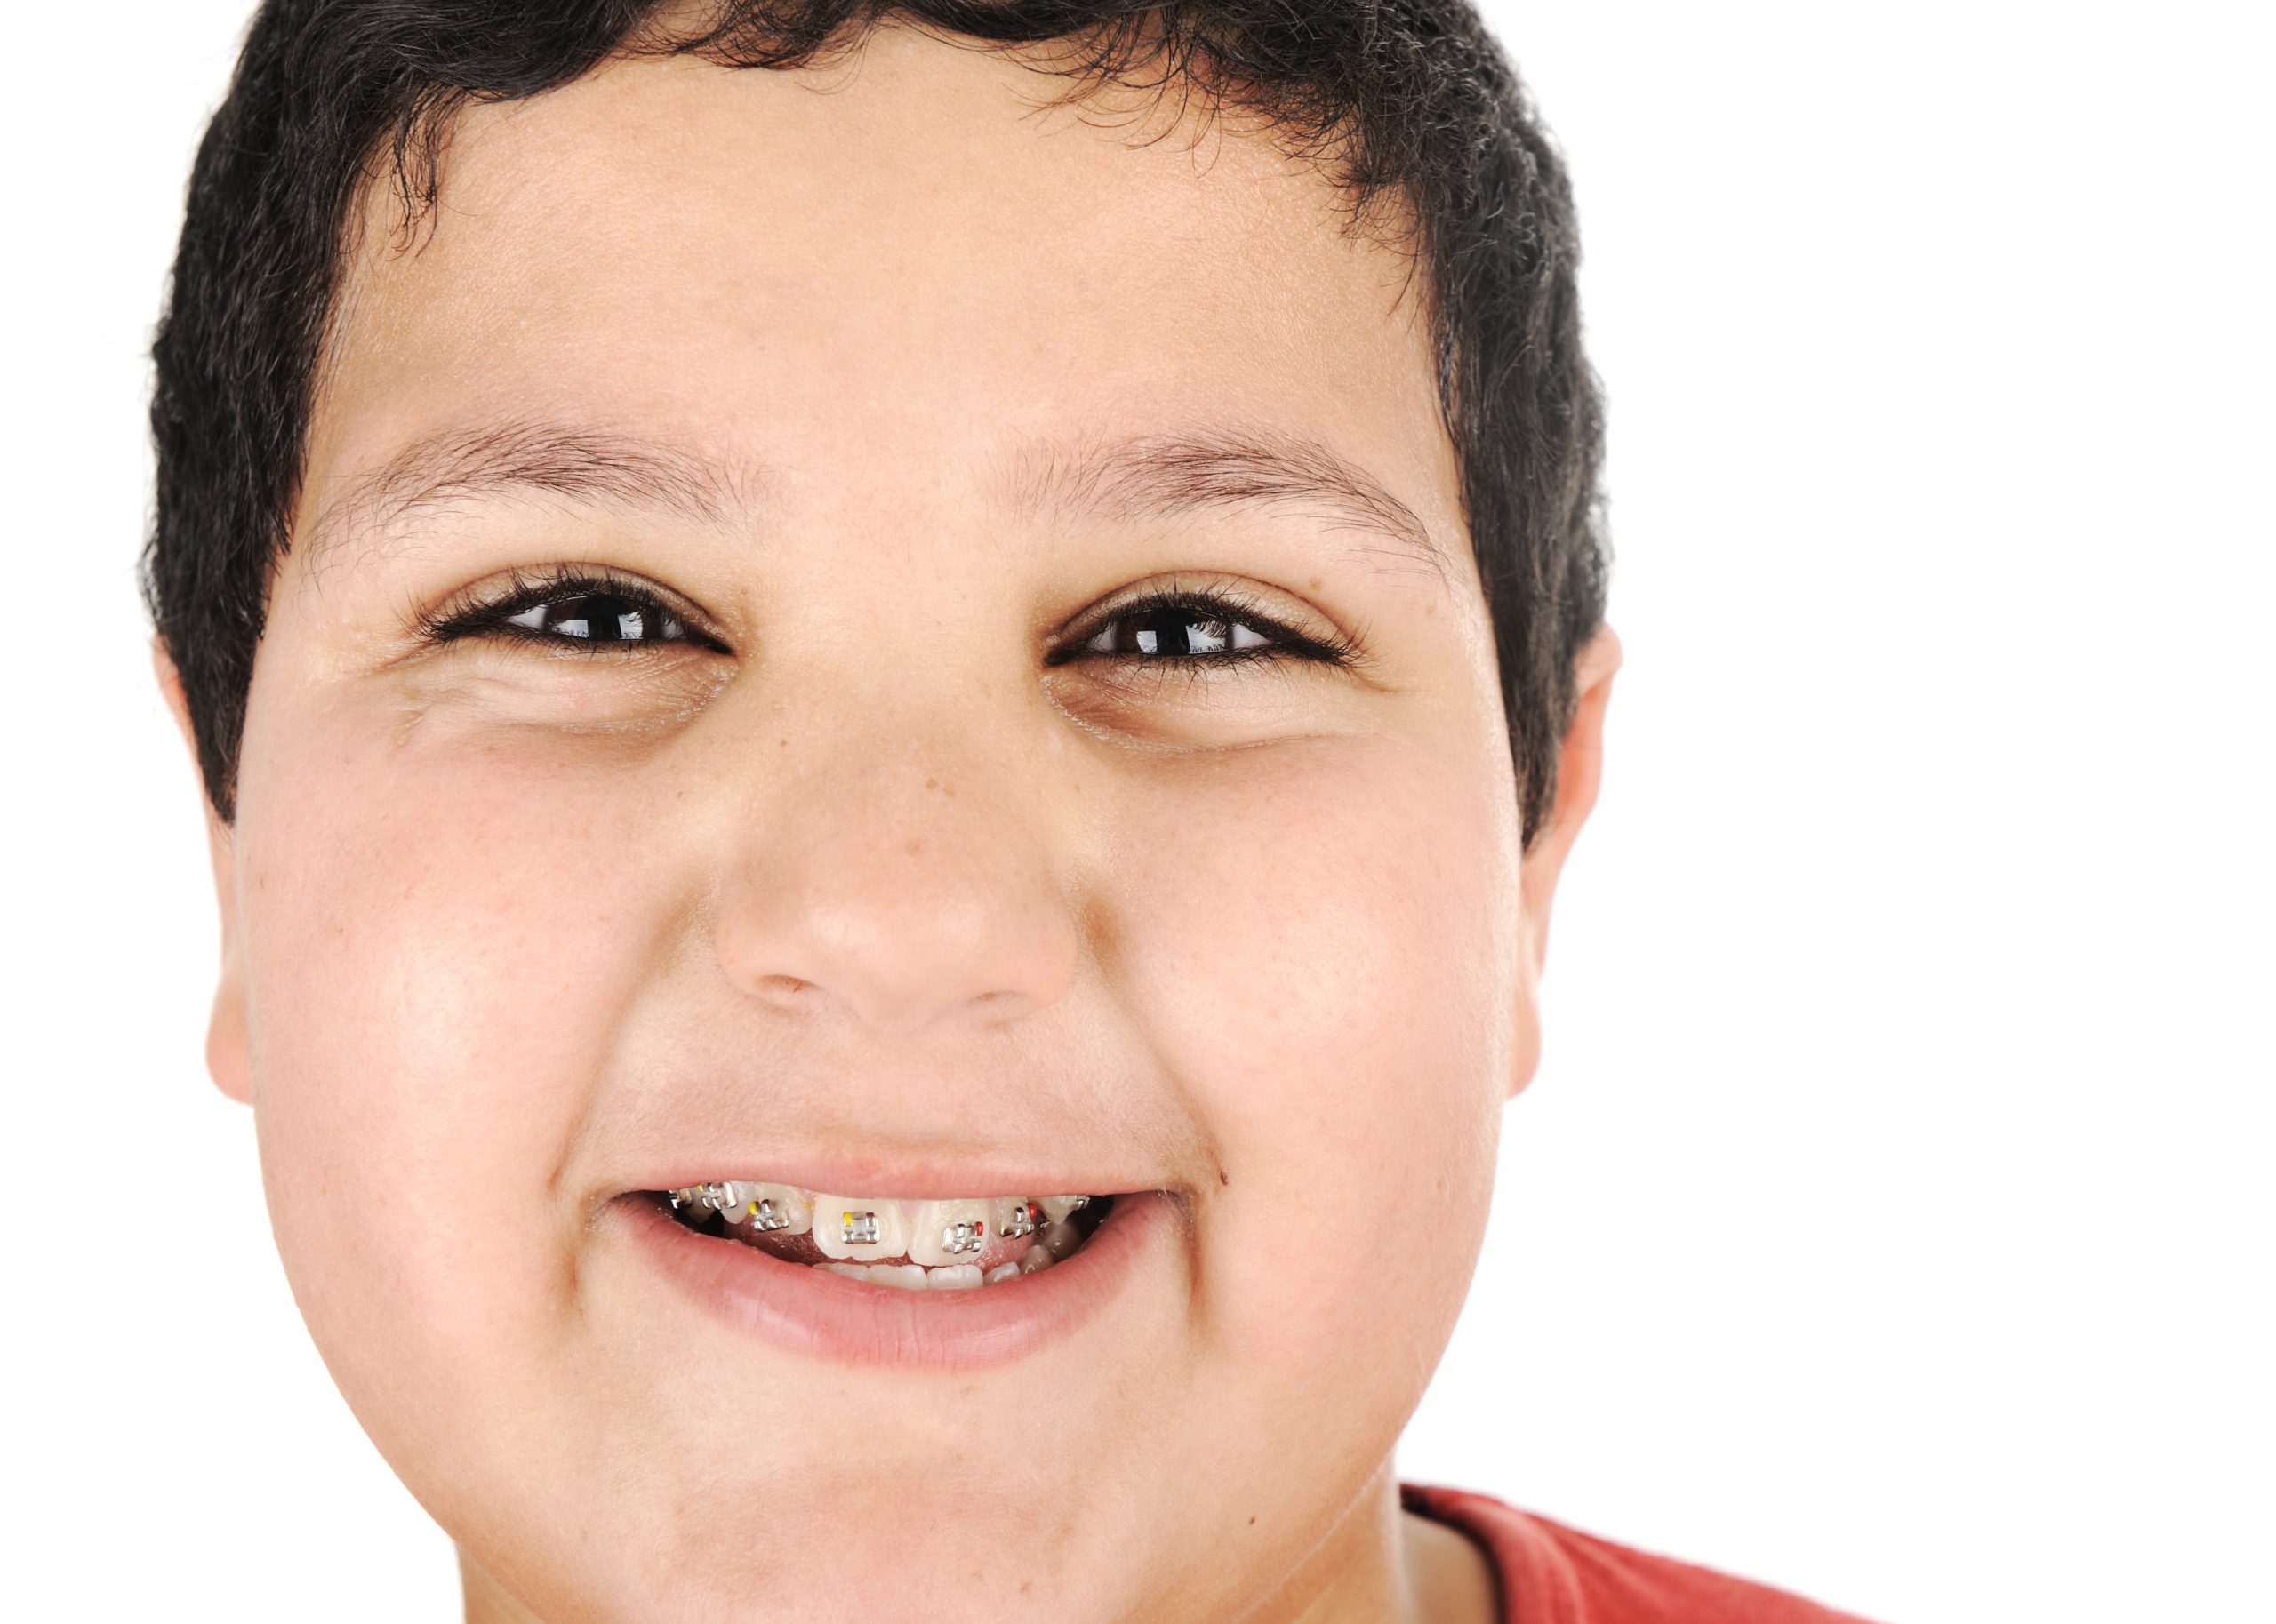 Straighten Up! The Benefits of Using Invisalign for Orthodontic Treatment